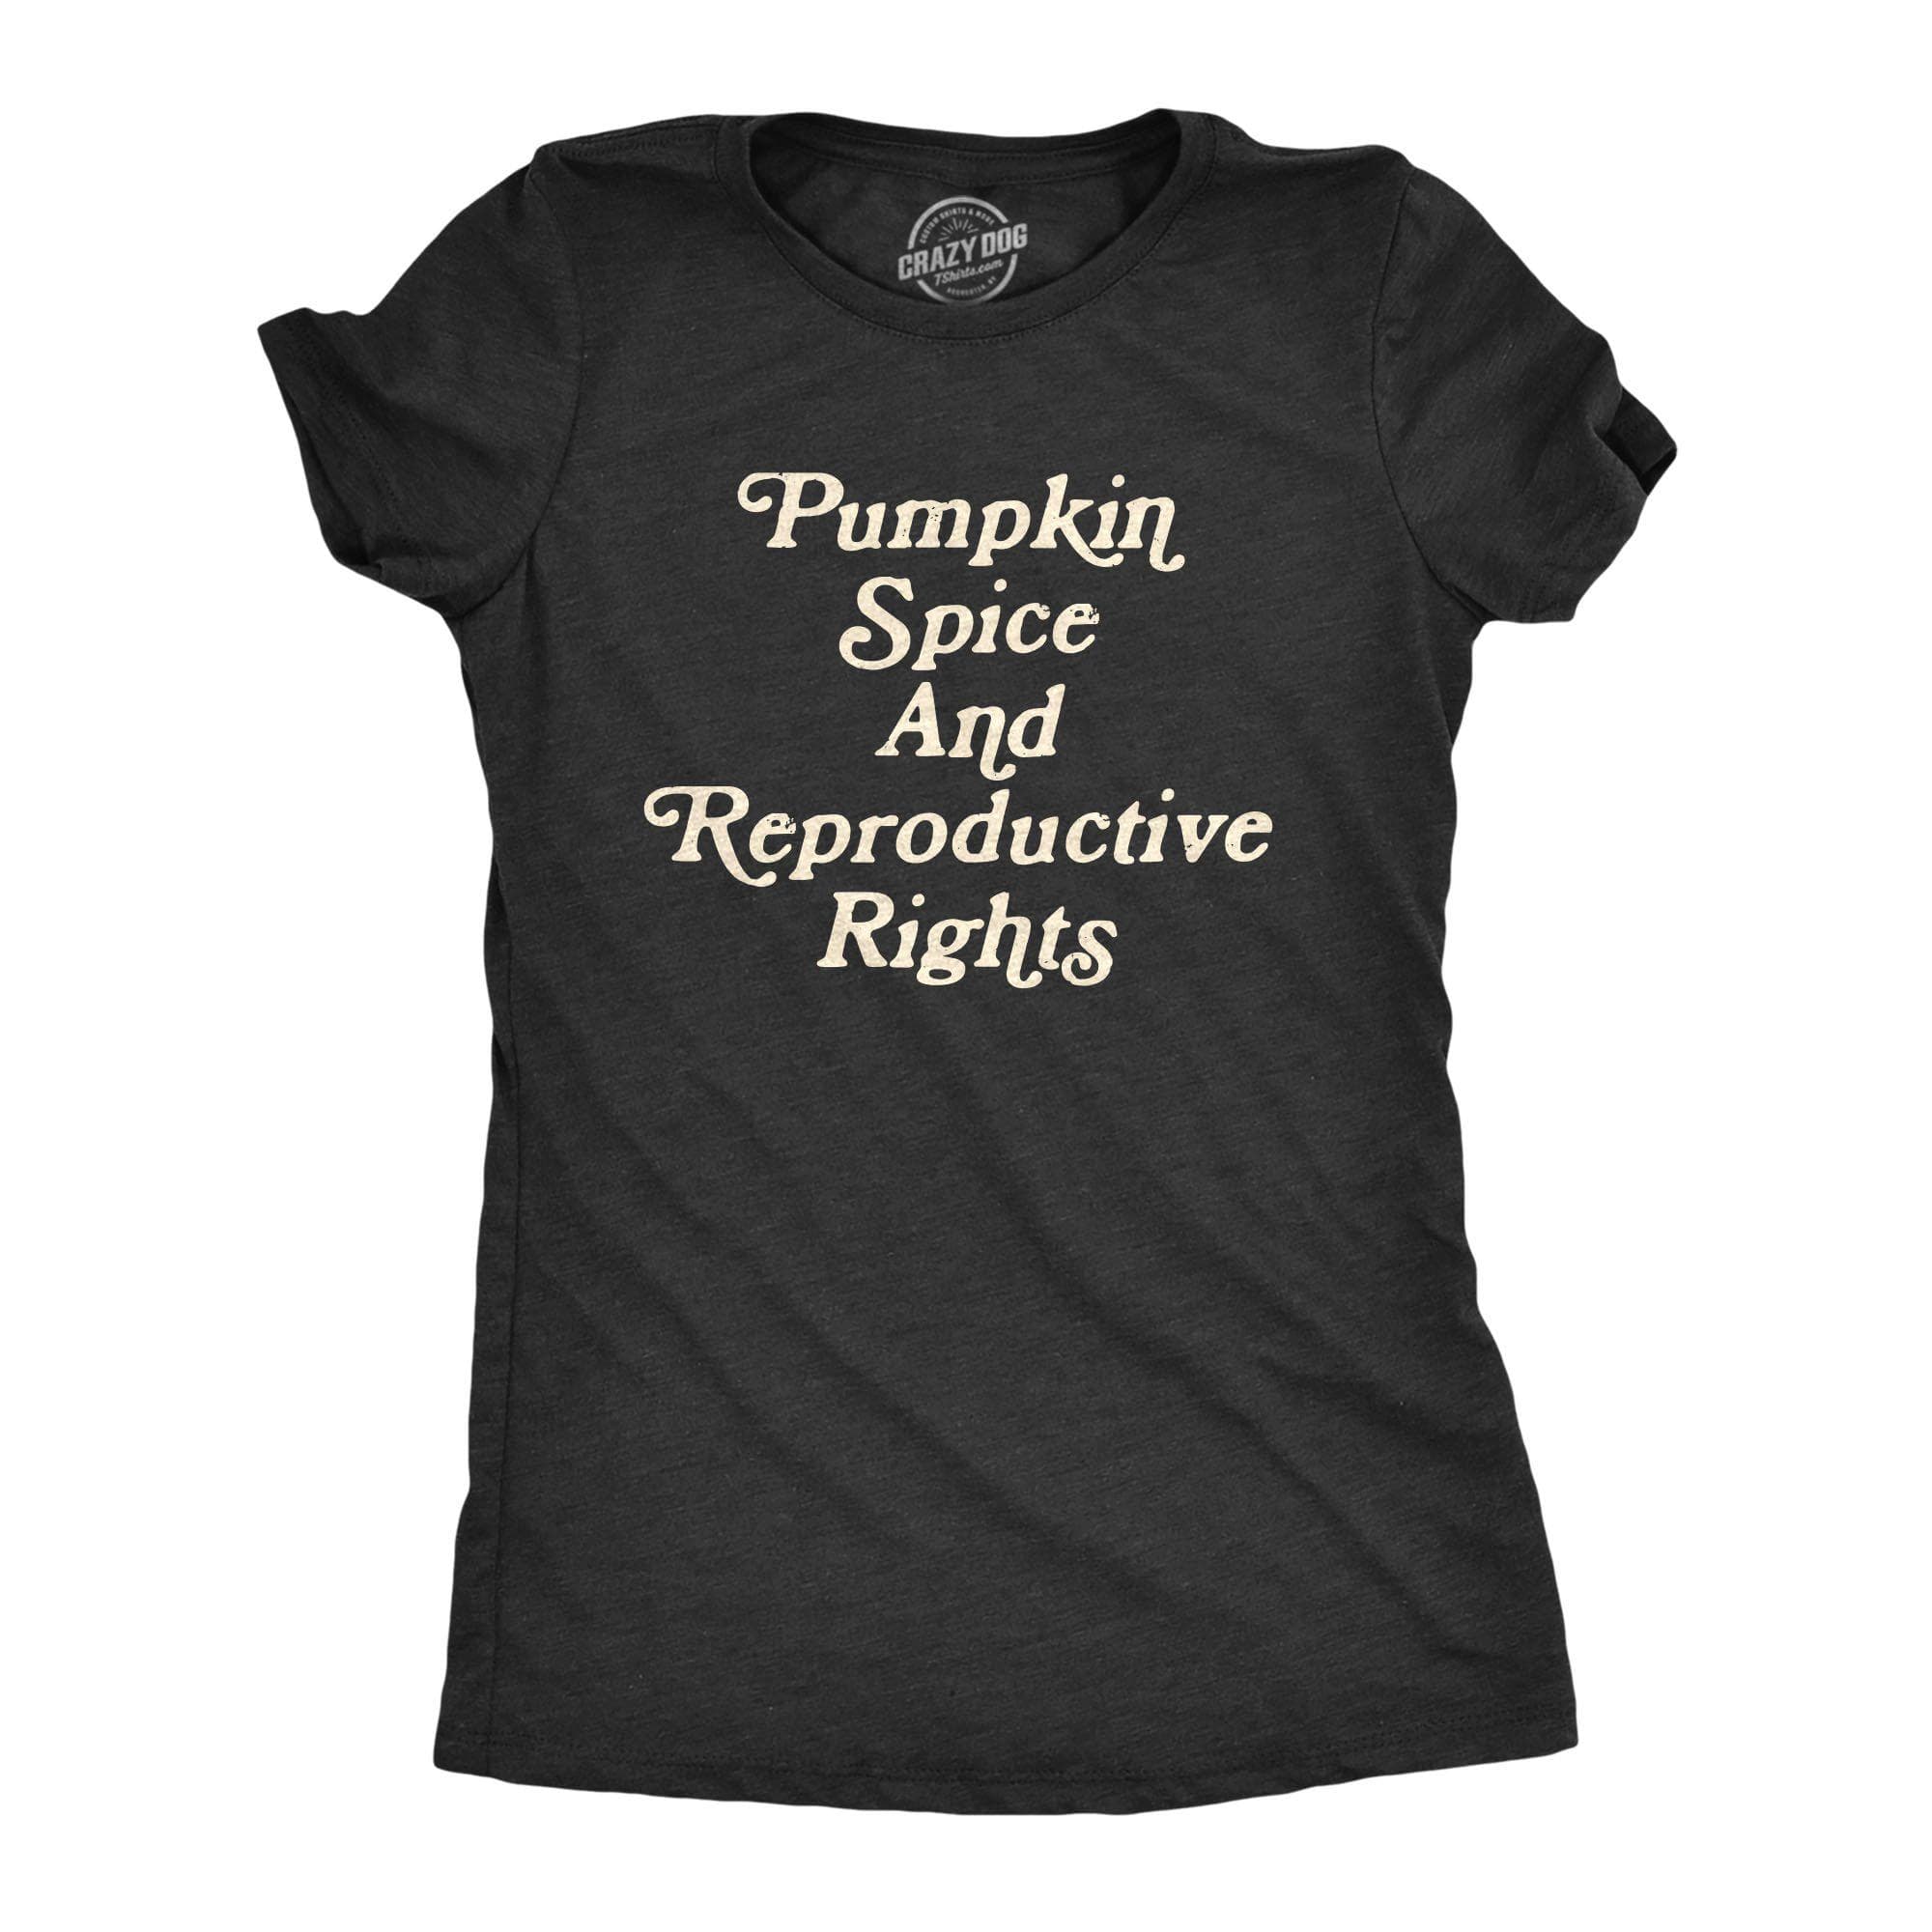 Pumpkin Spice And Reproductive Rights Women's Tshirt - Crazy Dog T-Shirts